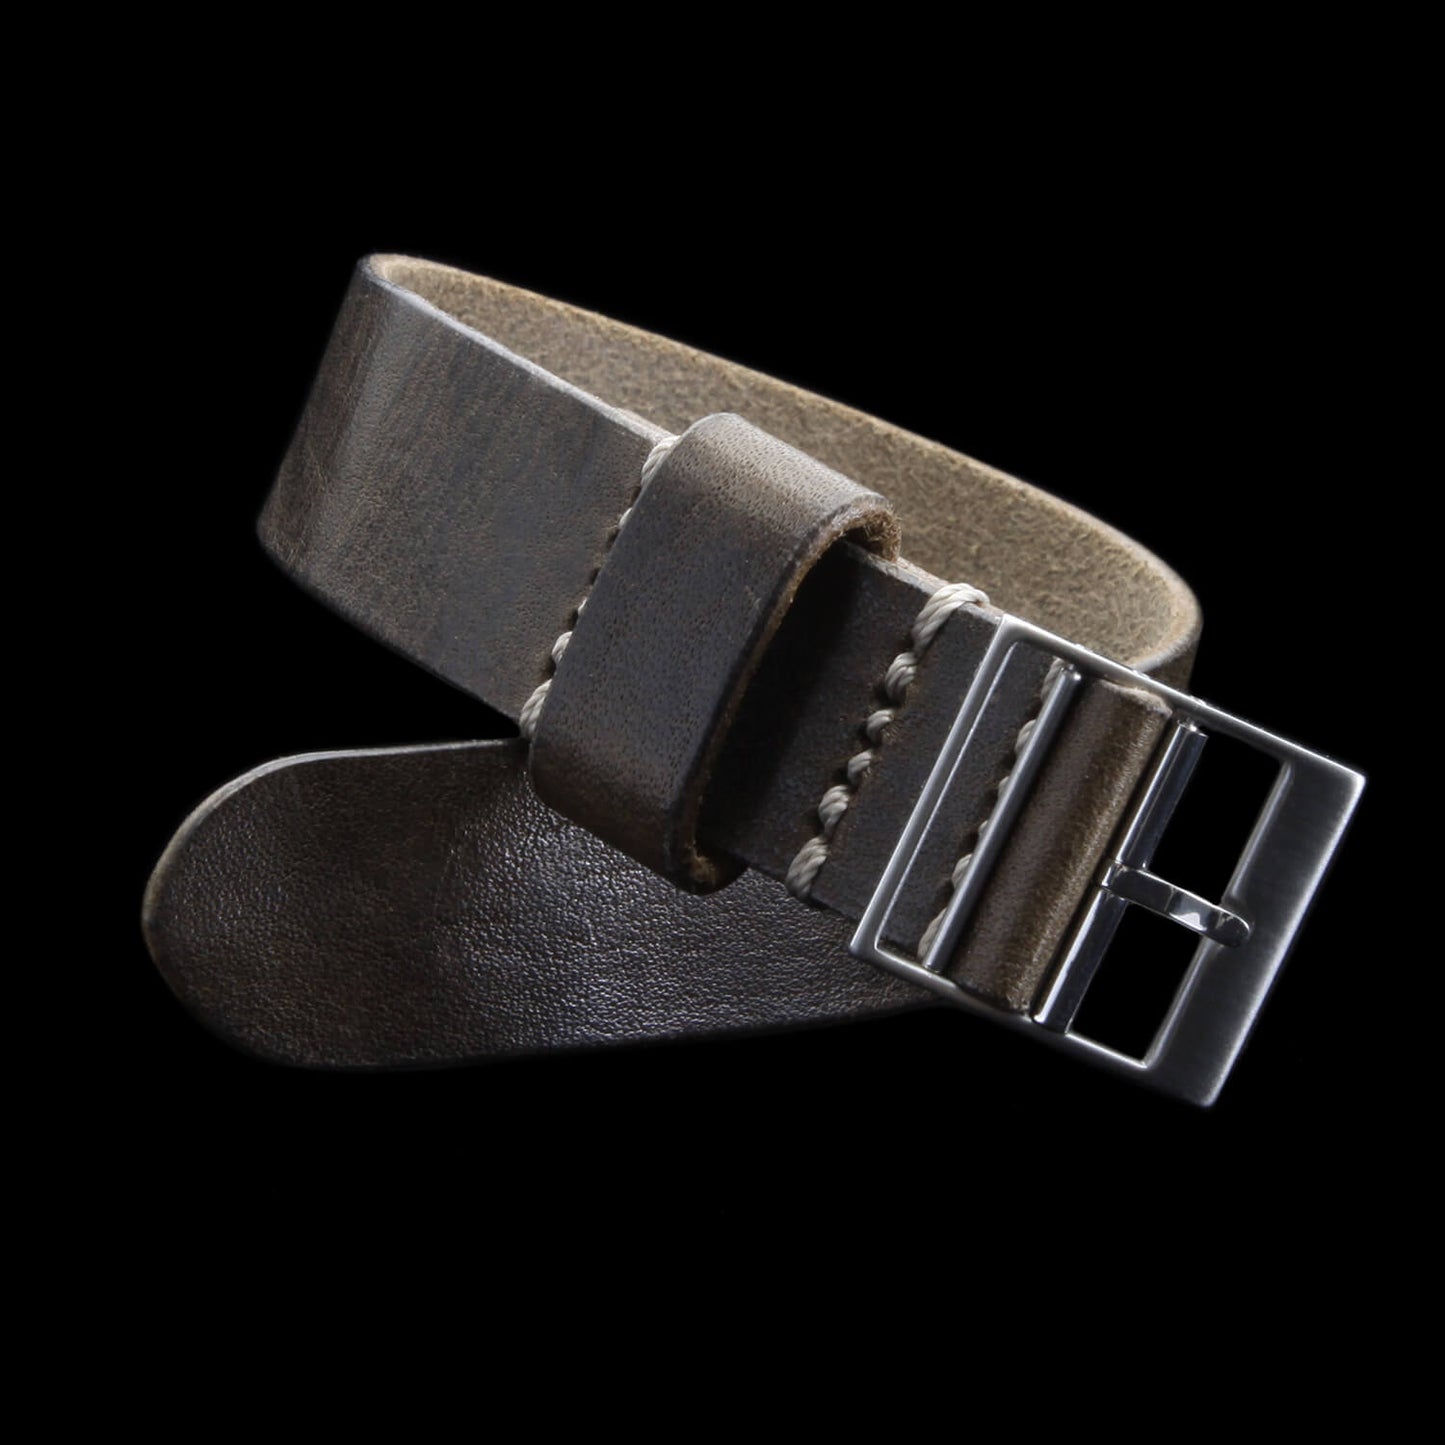 Leather Watch Strap, Classic RAF II Vintage 408 | Ladder Buckle | Full Grain Italian Vegetable-Tanned Leather | Cozy Handmade